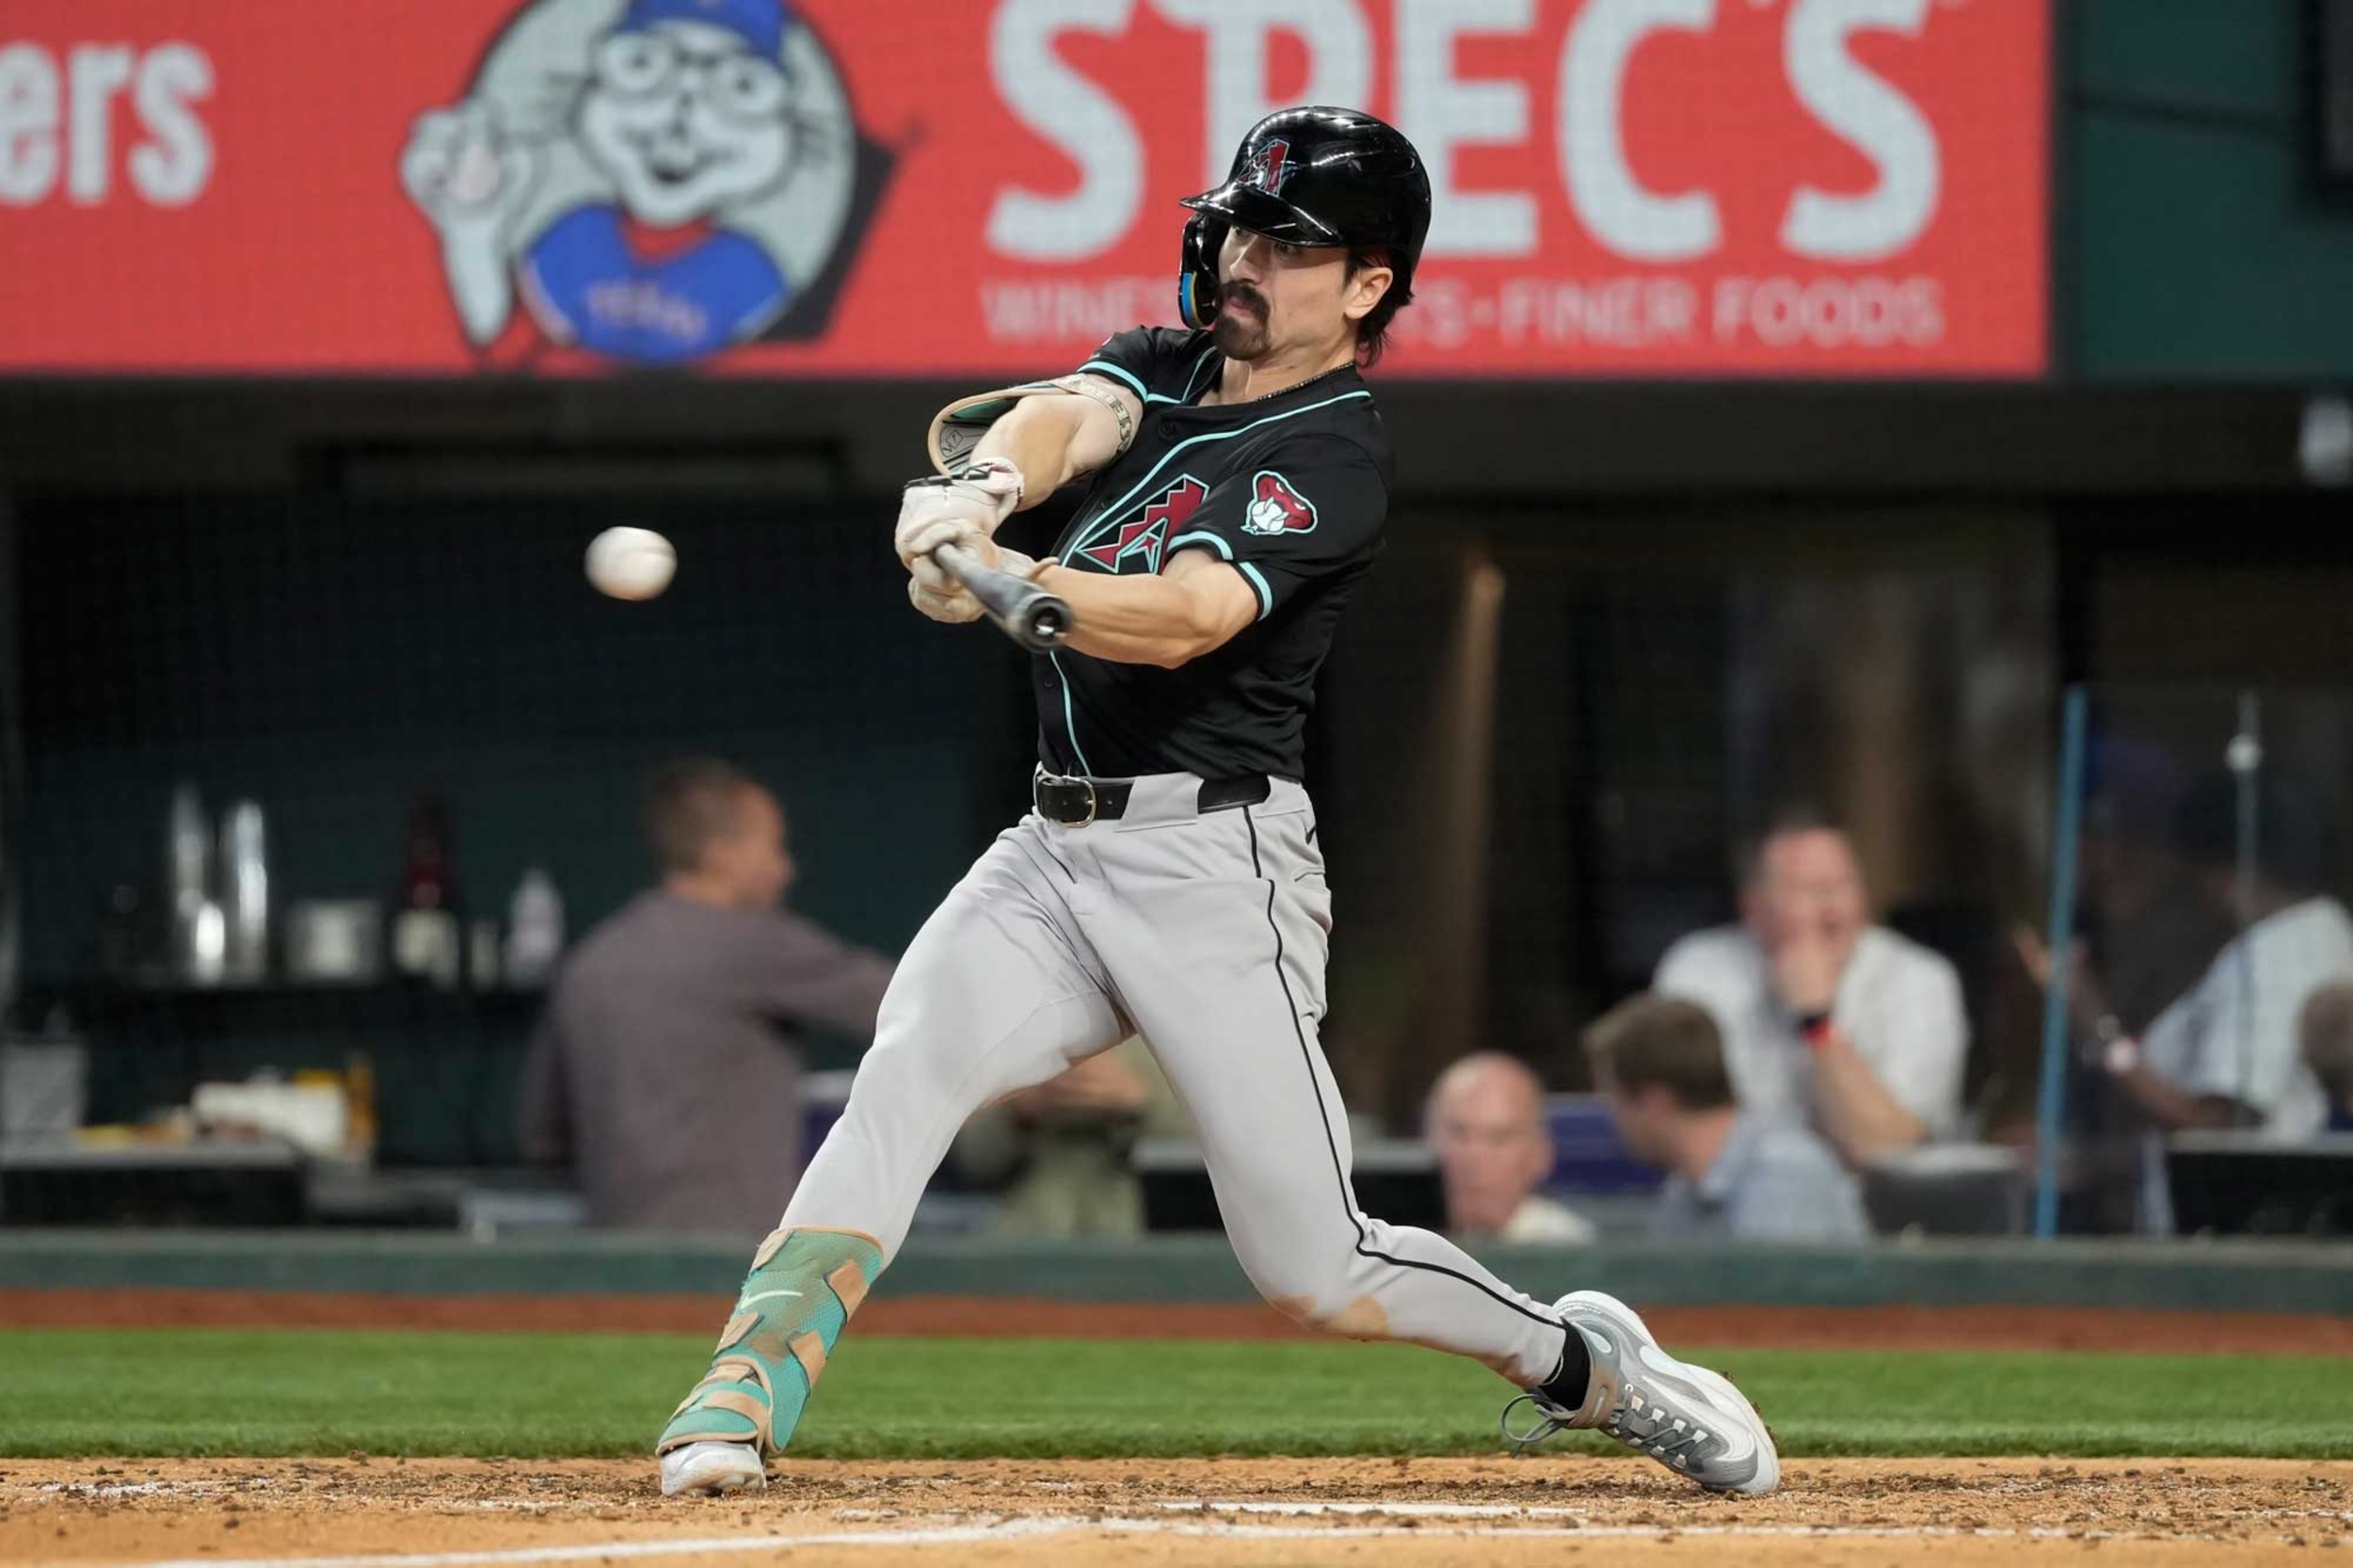 <p>Carroll won NL Rookie of the Year and finished fifth in the MVP voting last season, but he hasn't been the same this year. He's hitting just .198-2-20 with 10 steals in 62 games, creating speculating that his past shoulder issues are hindering him at the plate.</p><p>You may also like: <a href='https://www.yardbarker.com/mlb/articles/25_mlb_managers_who_found_success_with_multiple_teams/s1__38909209'>25 MLB managers who found success with multiple teams</a></p>